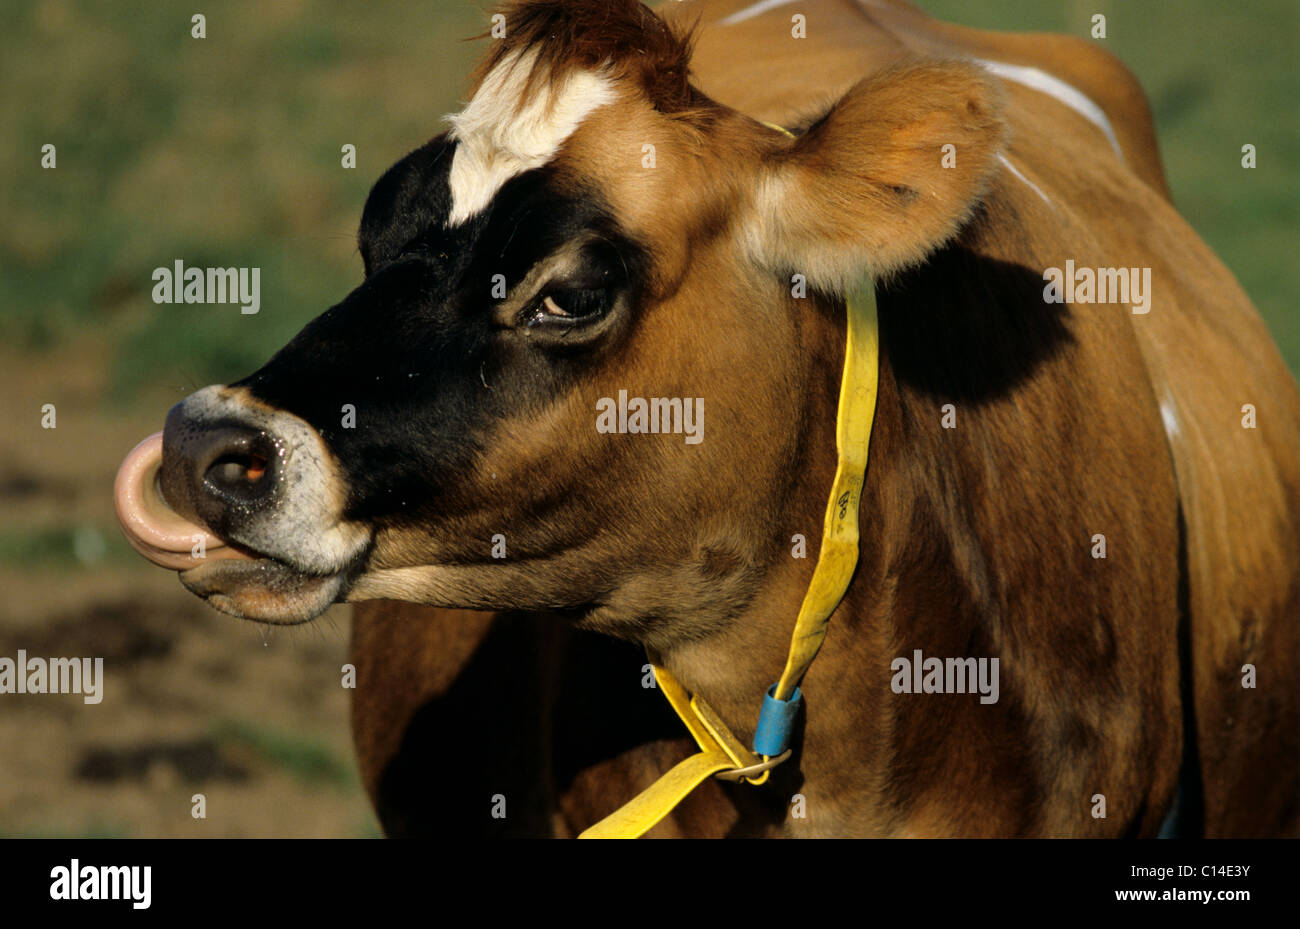 Jersey cow watching with tongue out and an identification collar Stock Photo